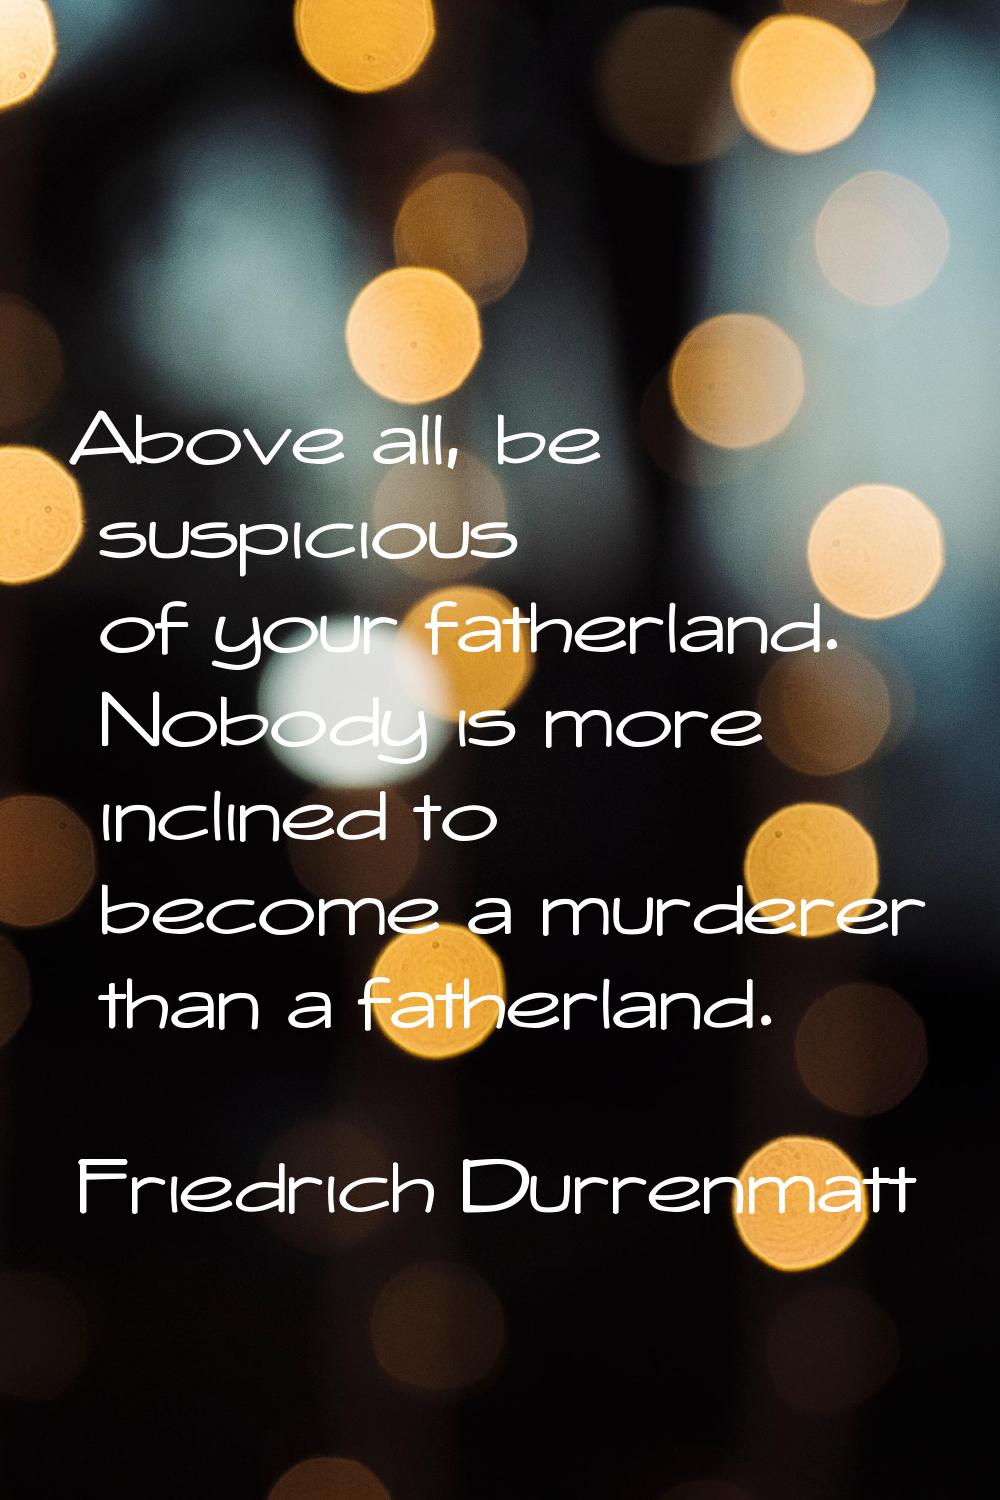 Above all, be suspicious of your fatherland. Nobody is more inclined to become a murderer than a fa